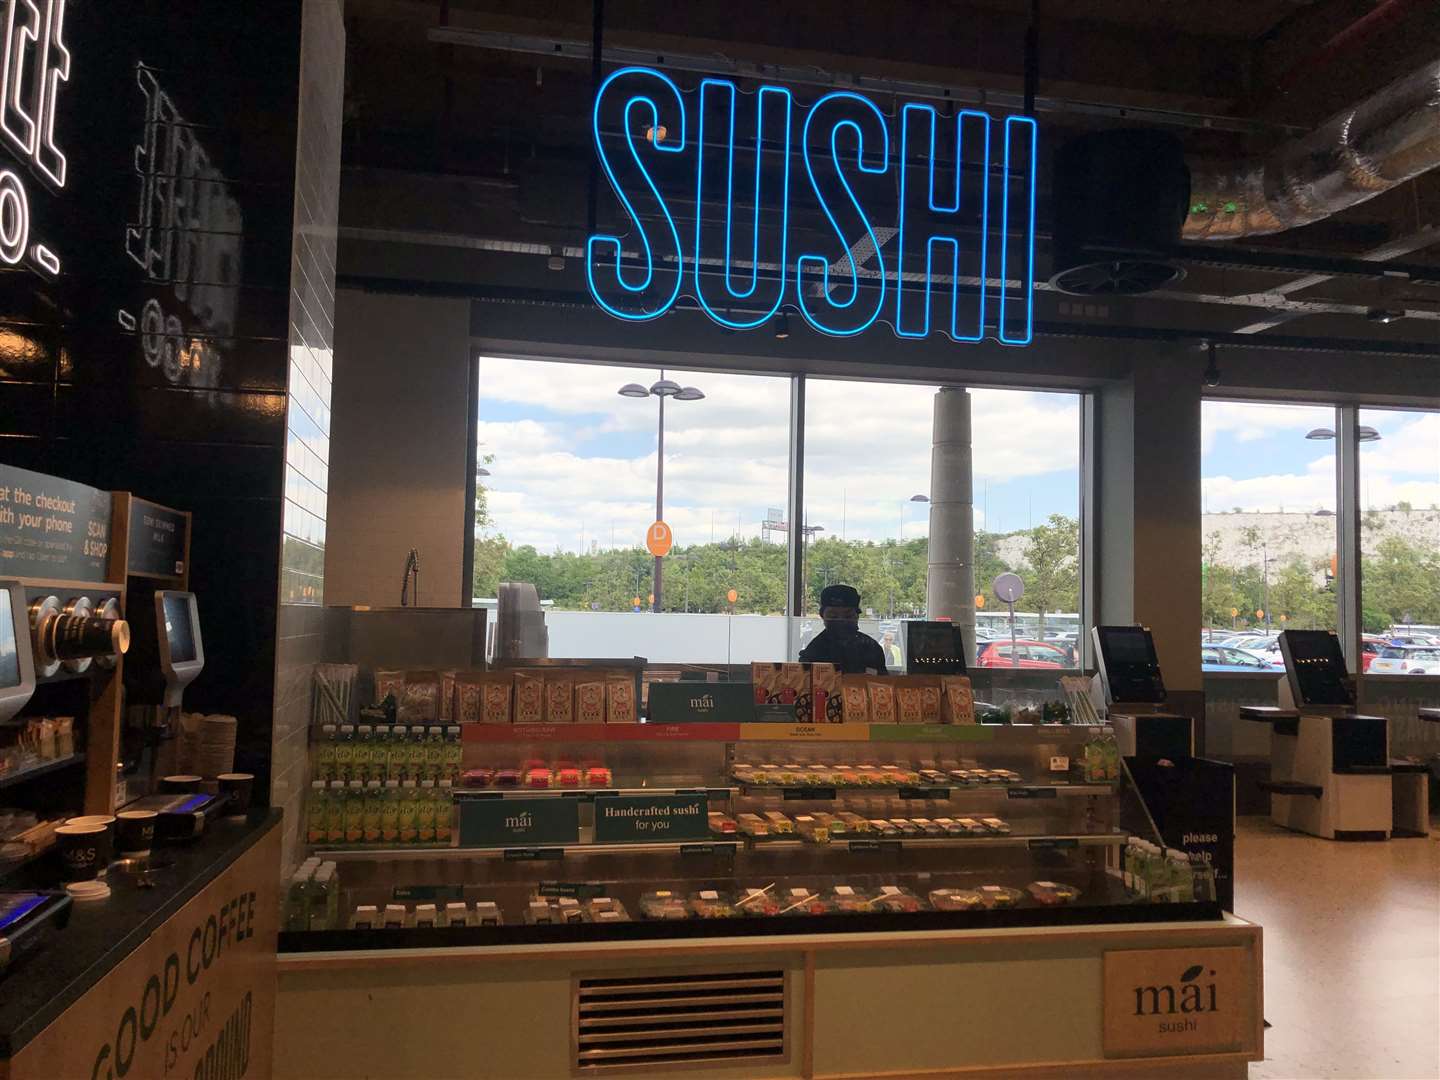 There is now a separate sushi counter